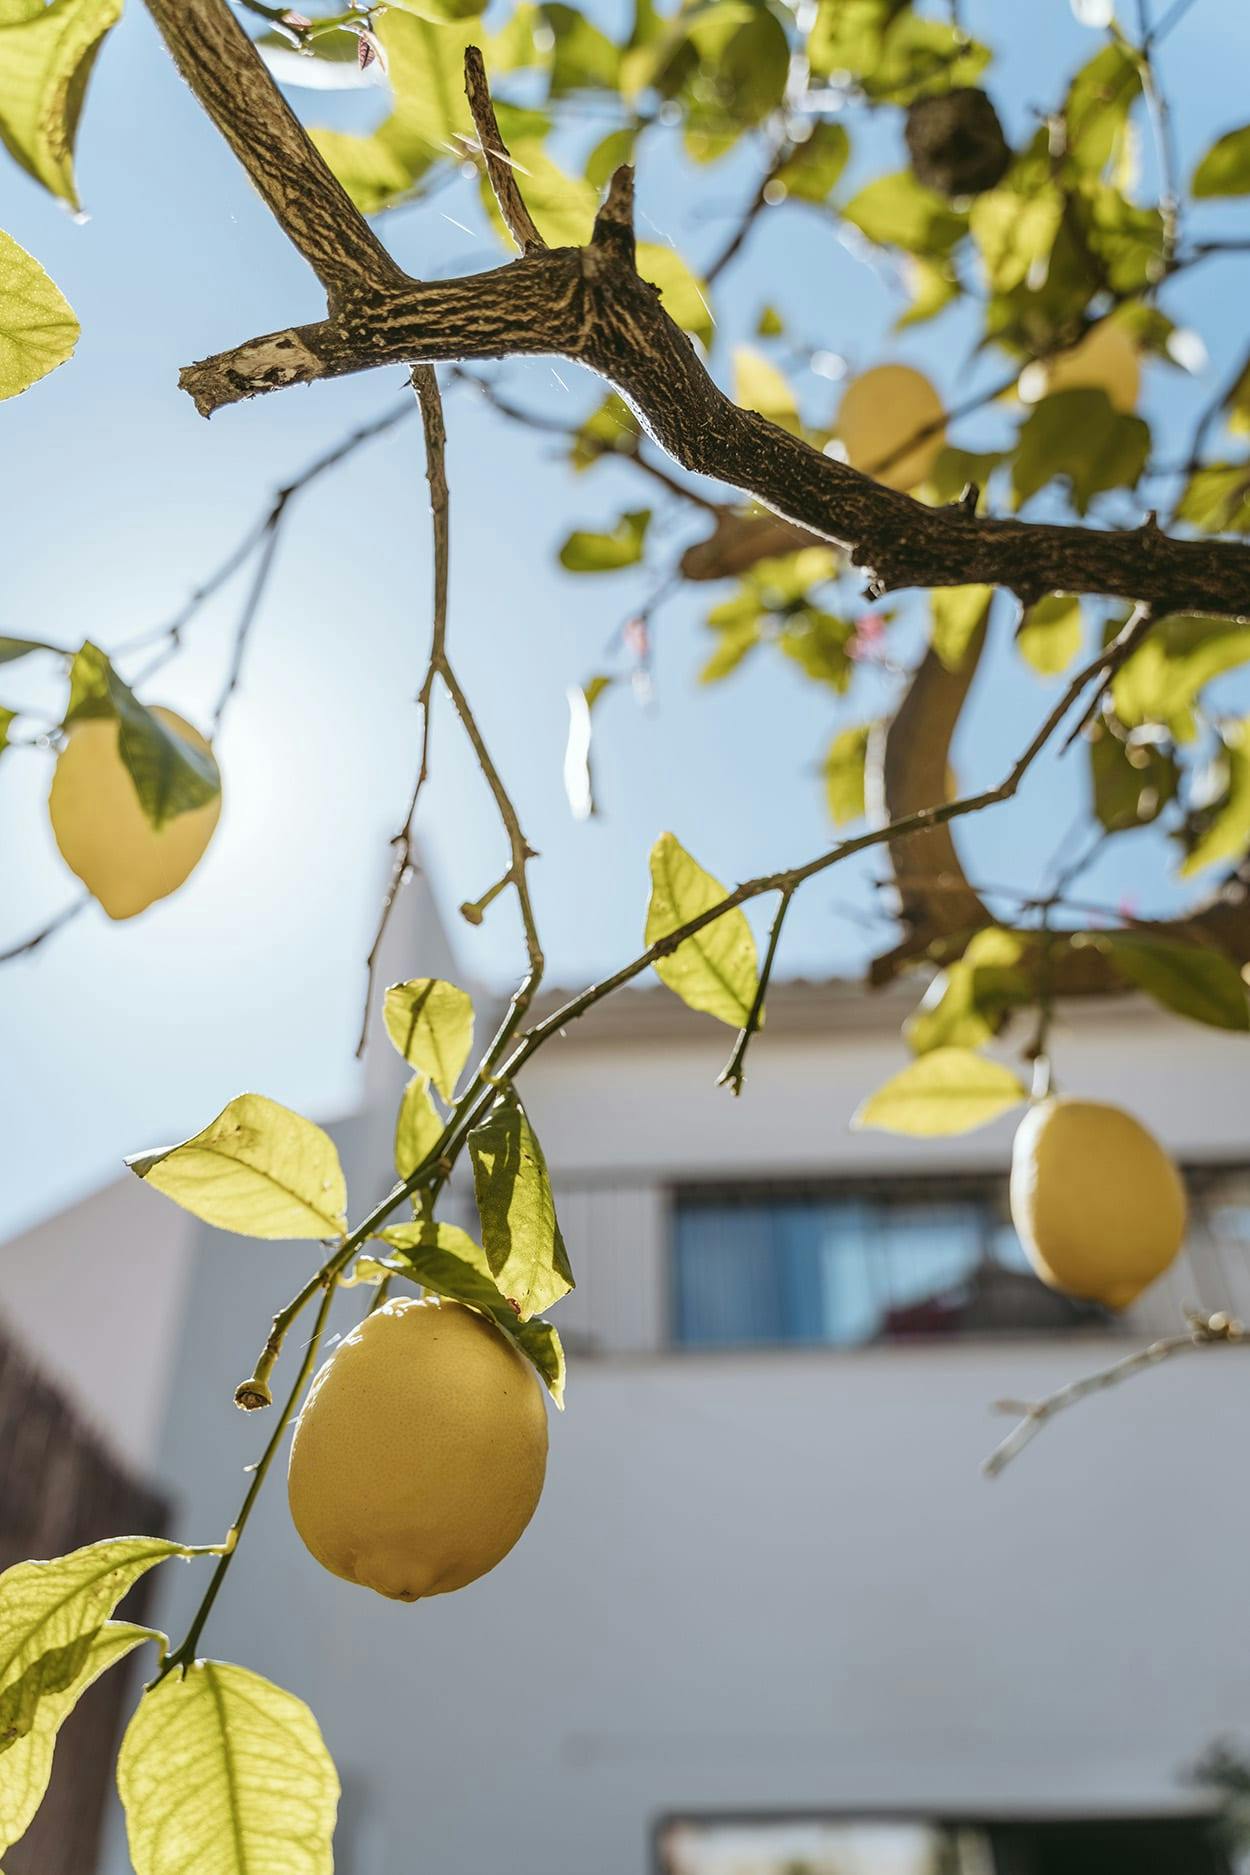 A tree with a few lemons hanging from its branches is shown in the image.